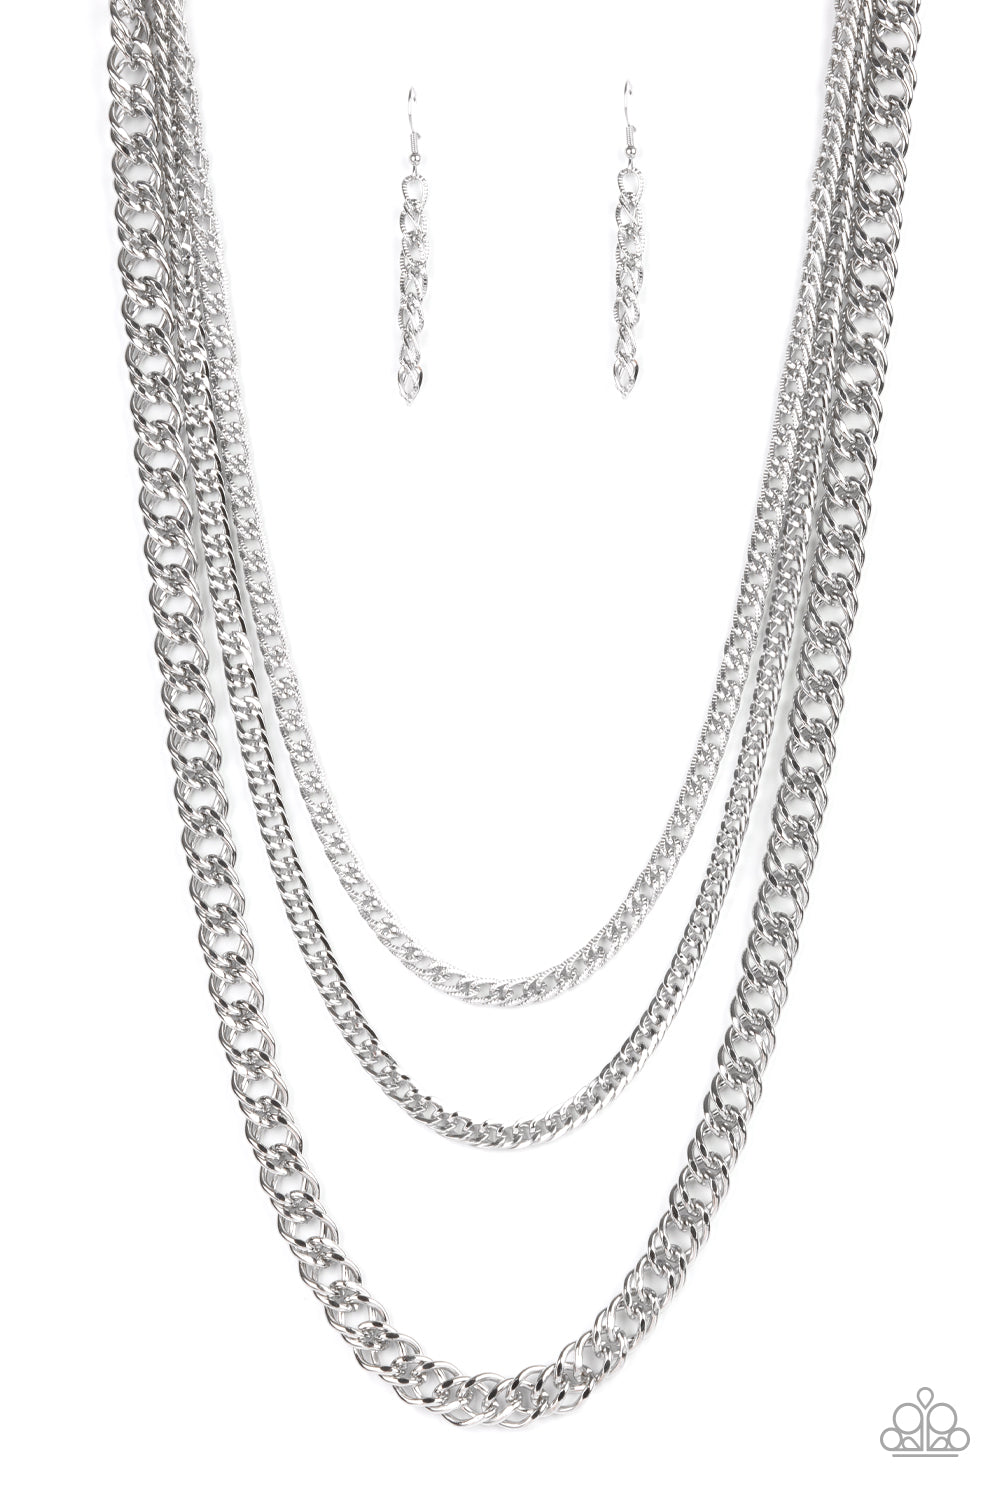 Chain of Champions Silver-Necklace